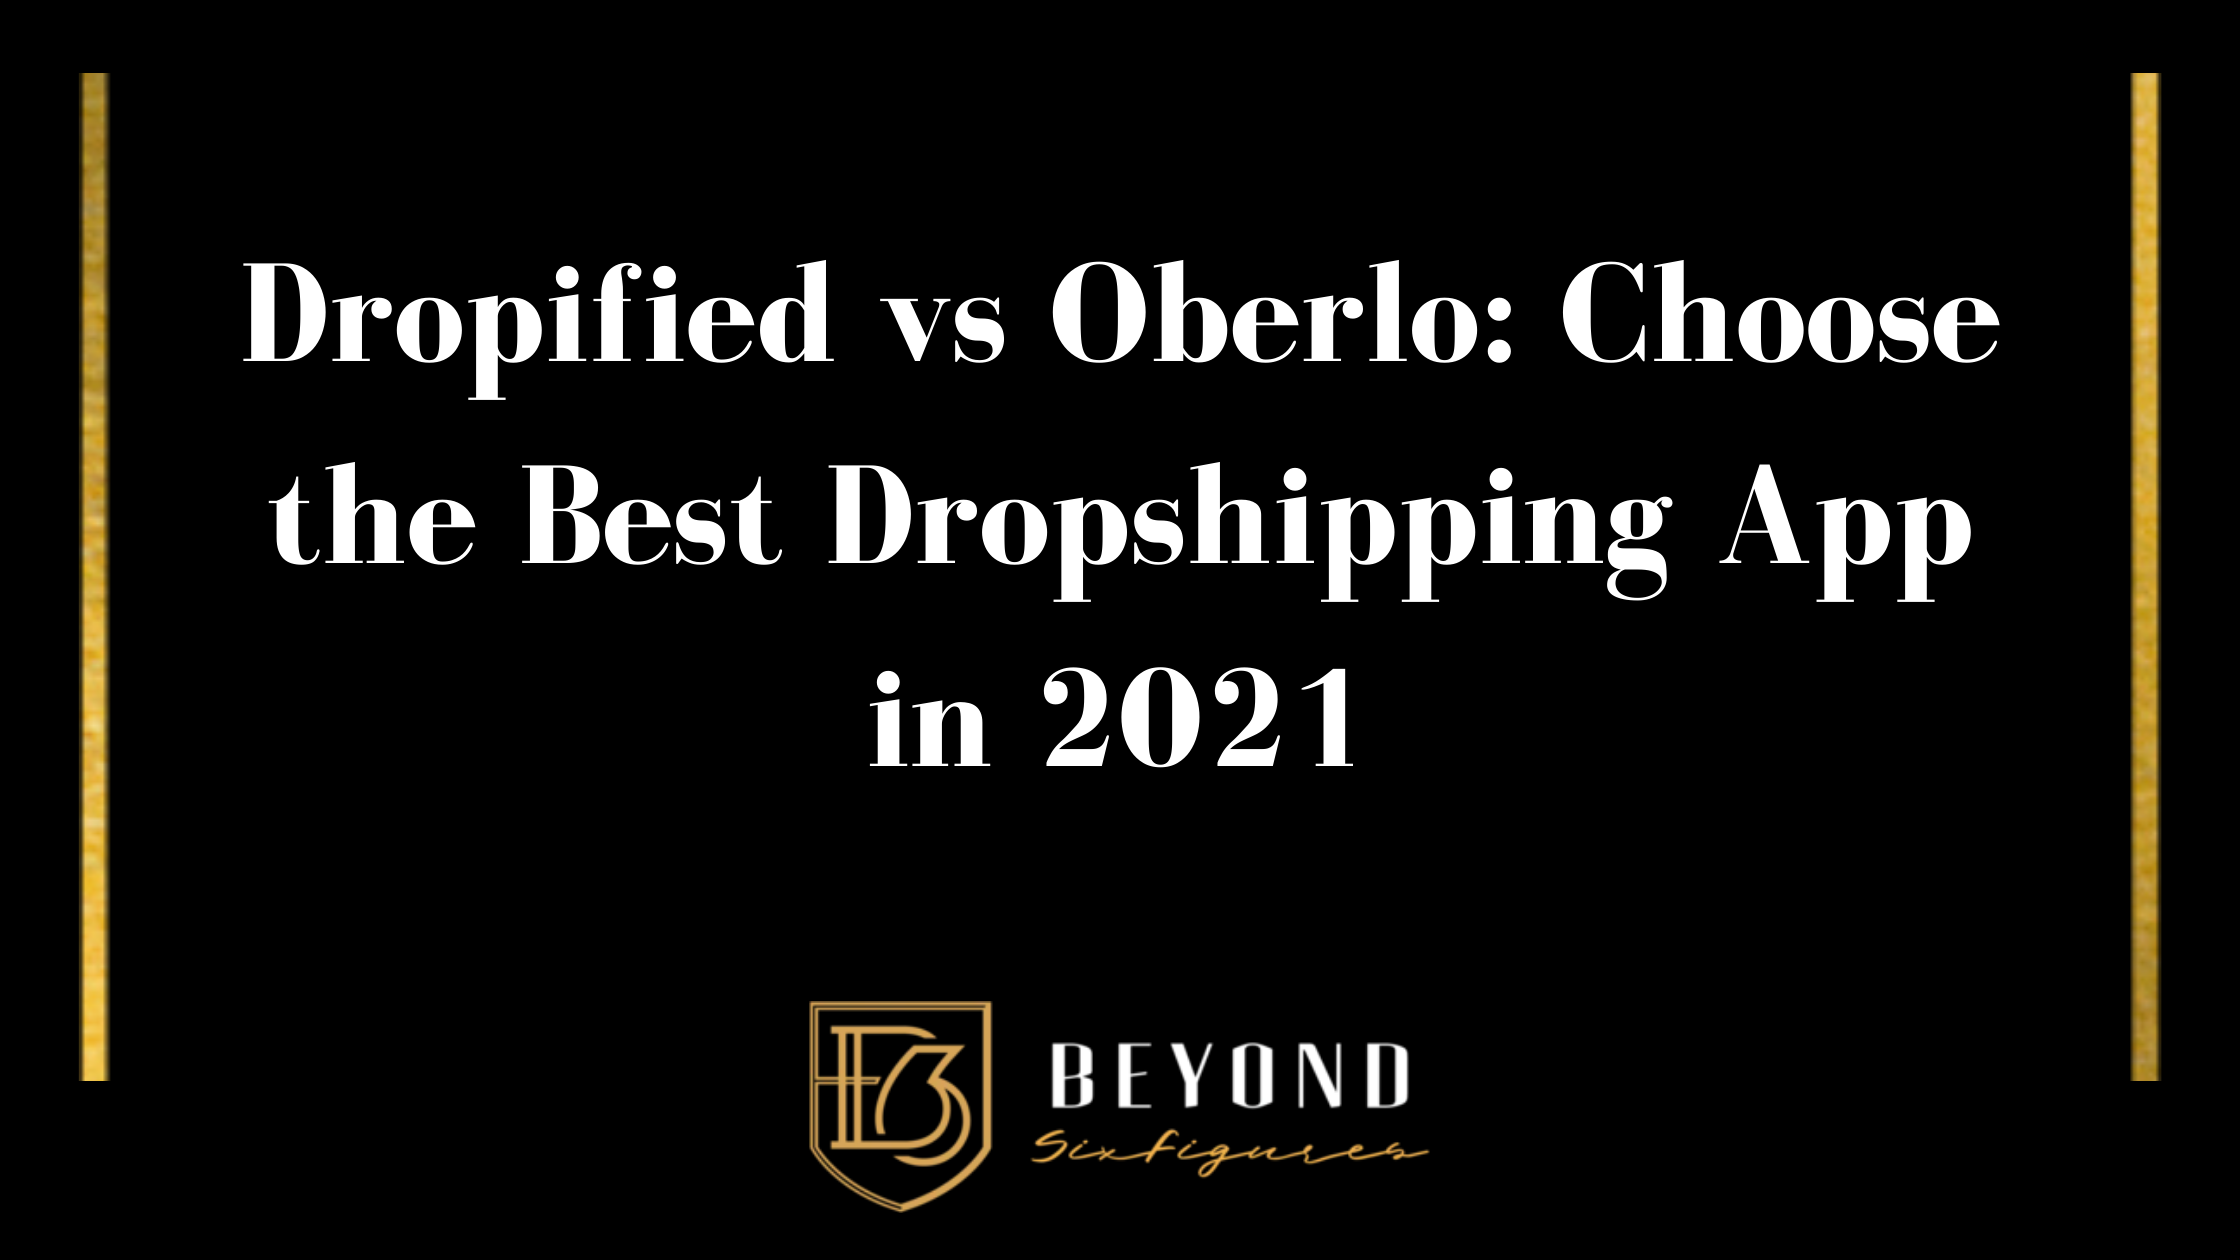 Title Banner for "Dropified vs Oberlo: Choose the Best Dropshipping App in 2021"